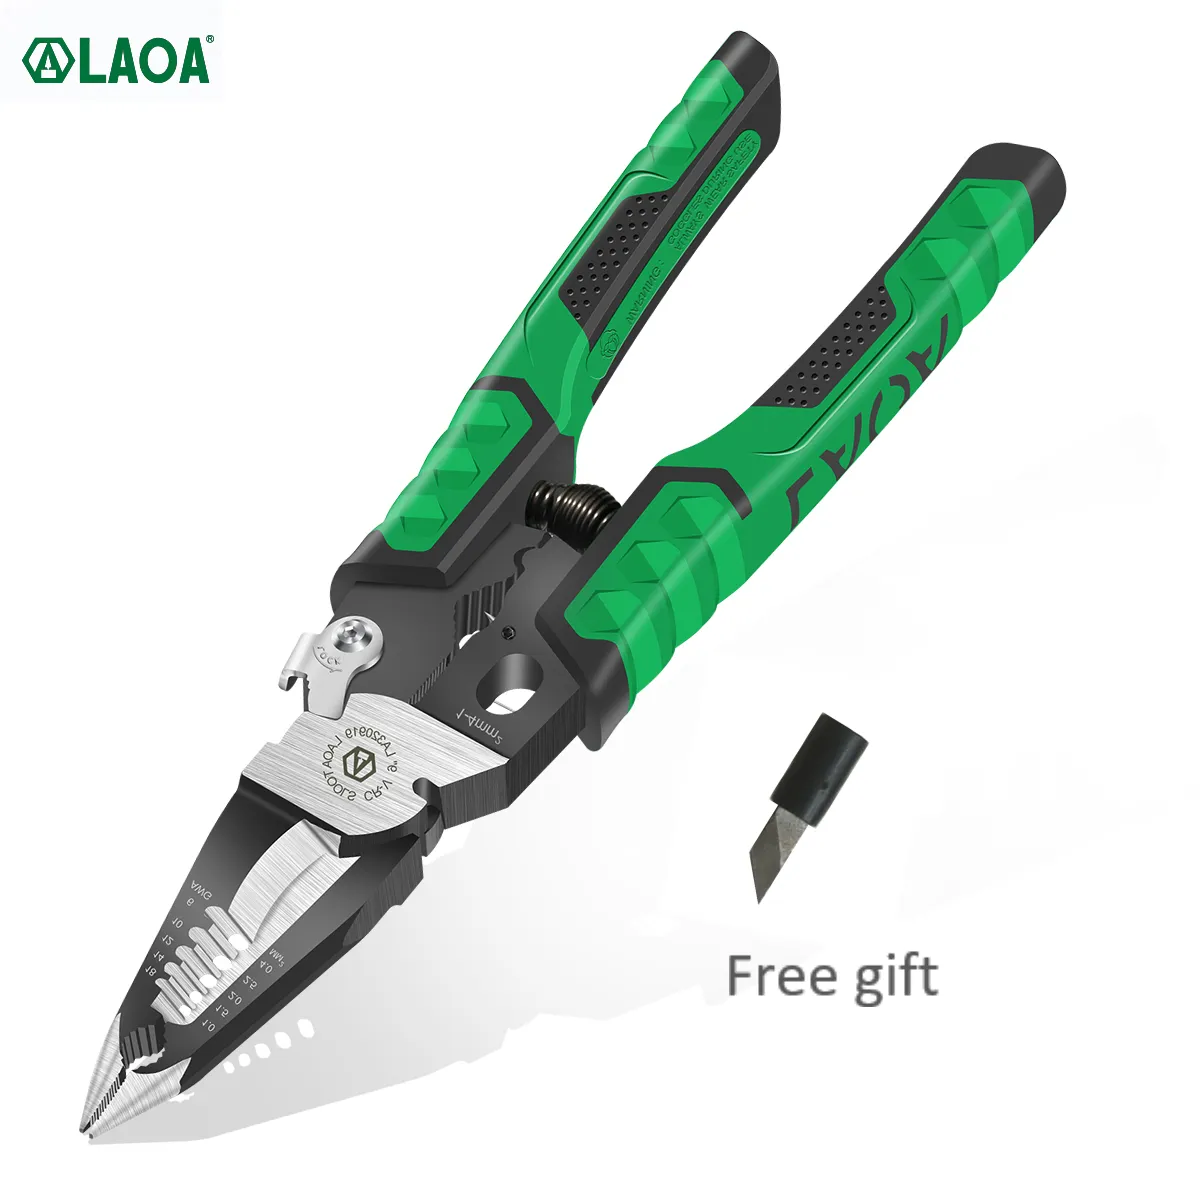 Laoa 9 In 1 Electrician Pliers Multifunctional Needle Nose Pliers For Wire Stripping Cable Cutters Terminal Crimping Hand Tools - Pliers - AliExpress